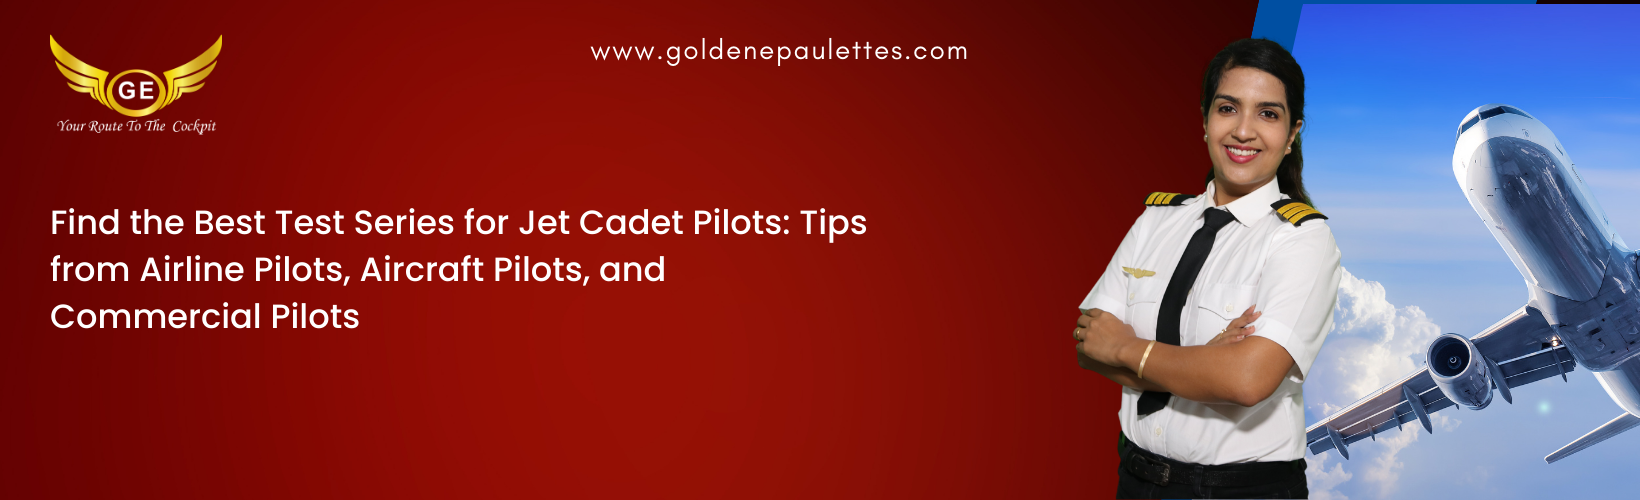 The Benefits of Working With Certified Instructors for Jet Cadet Pilots